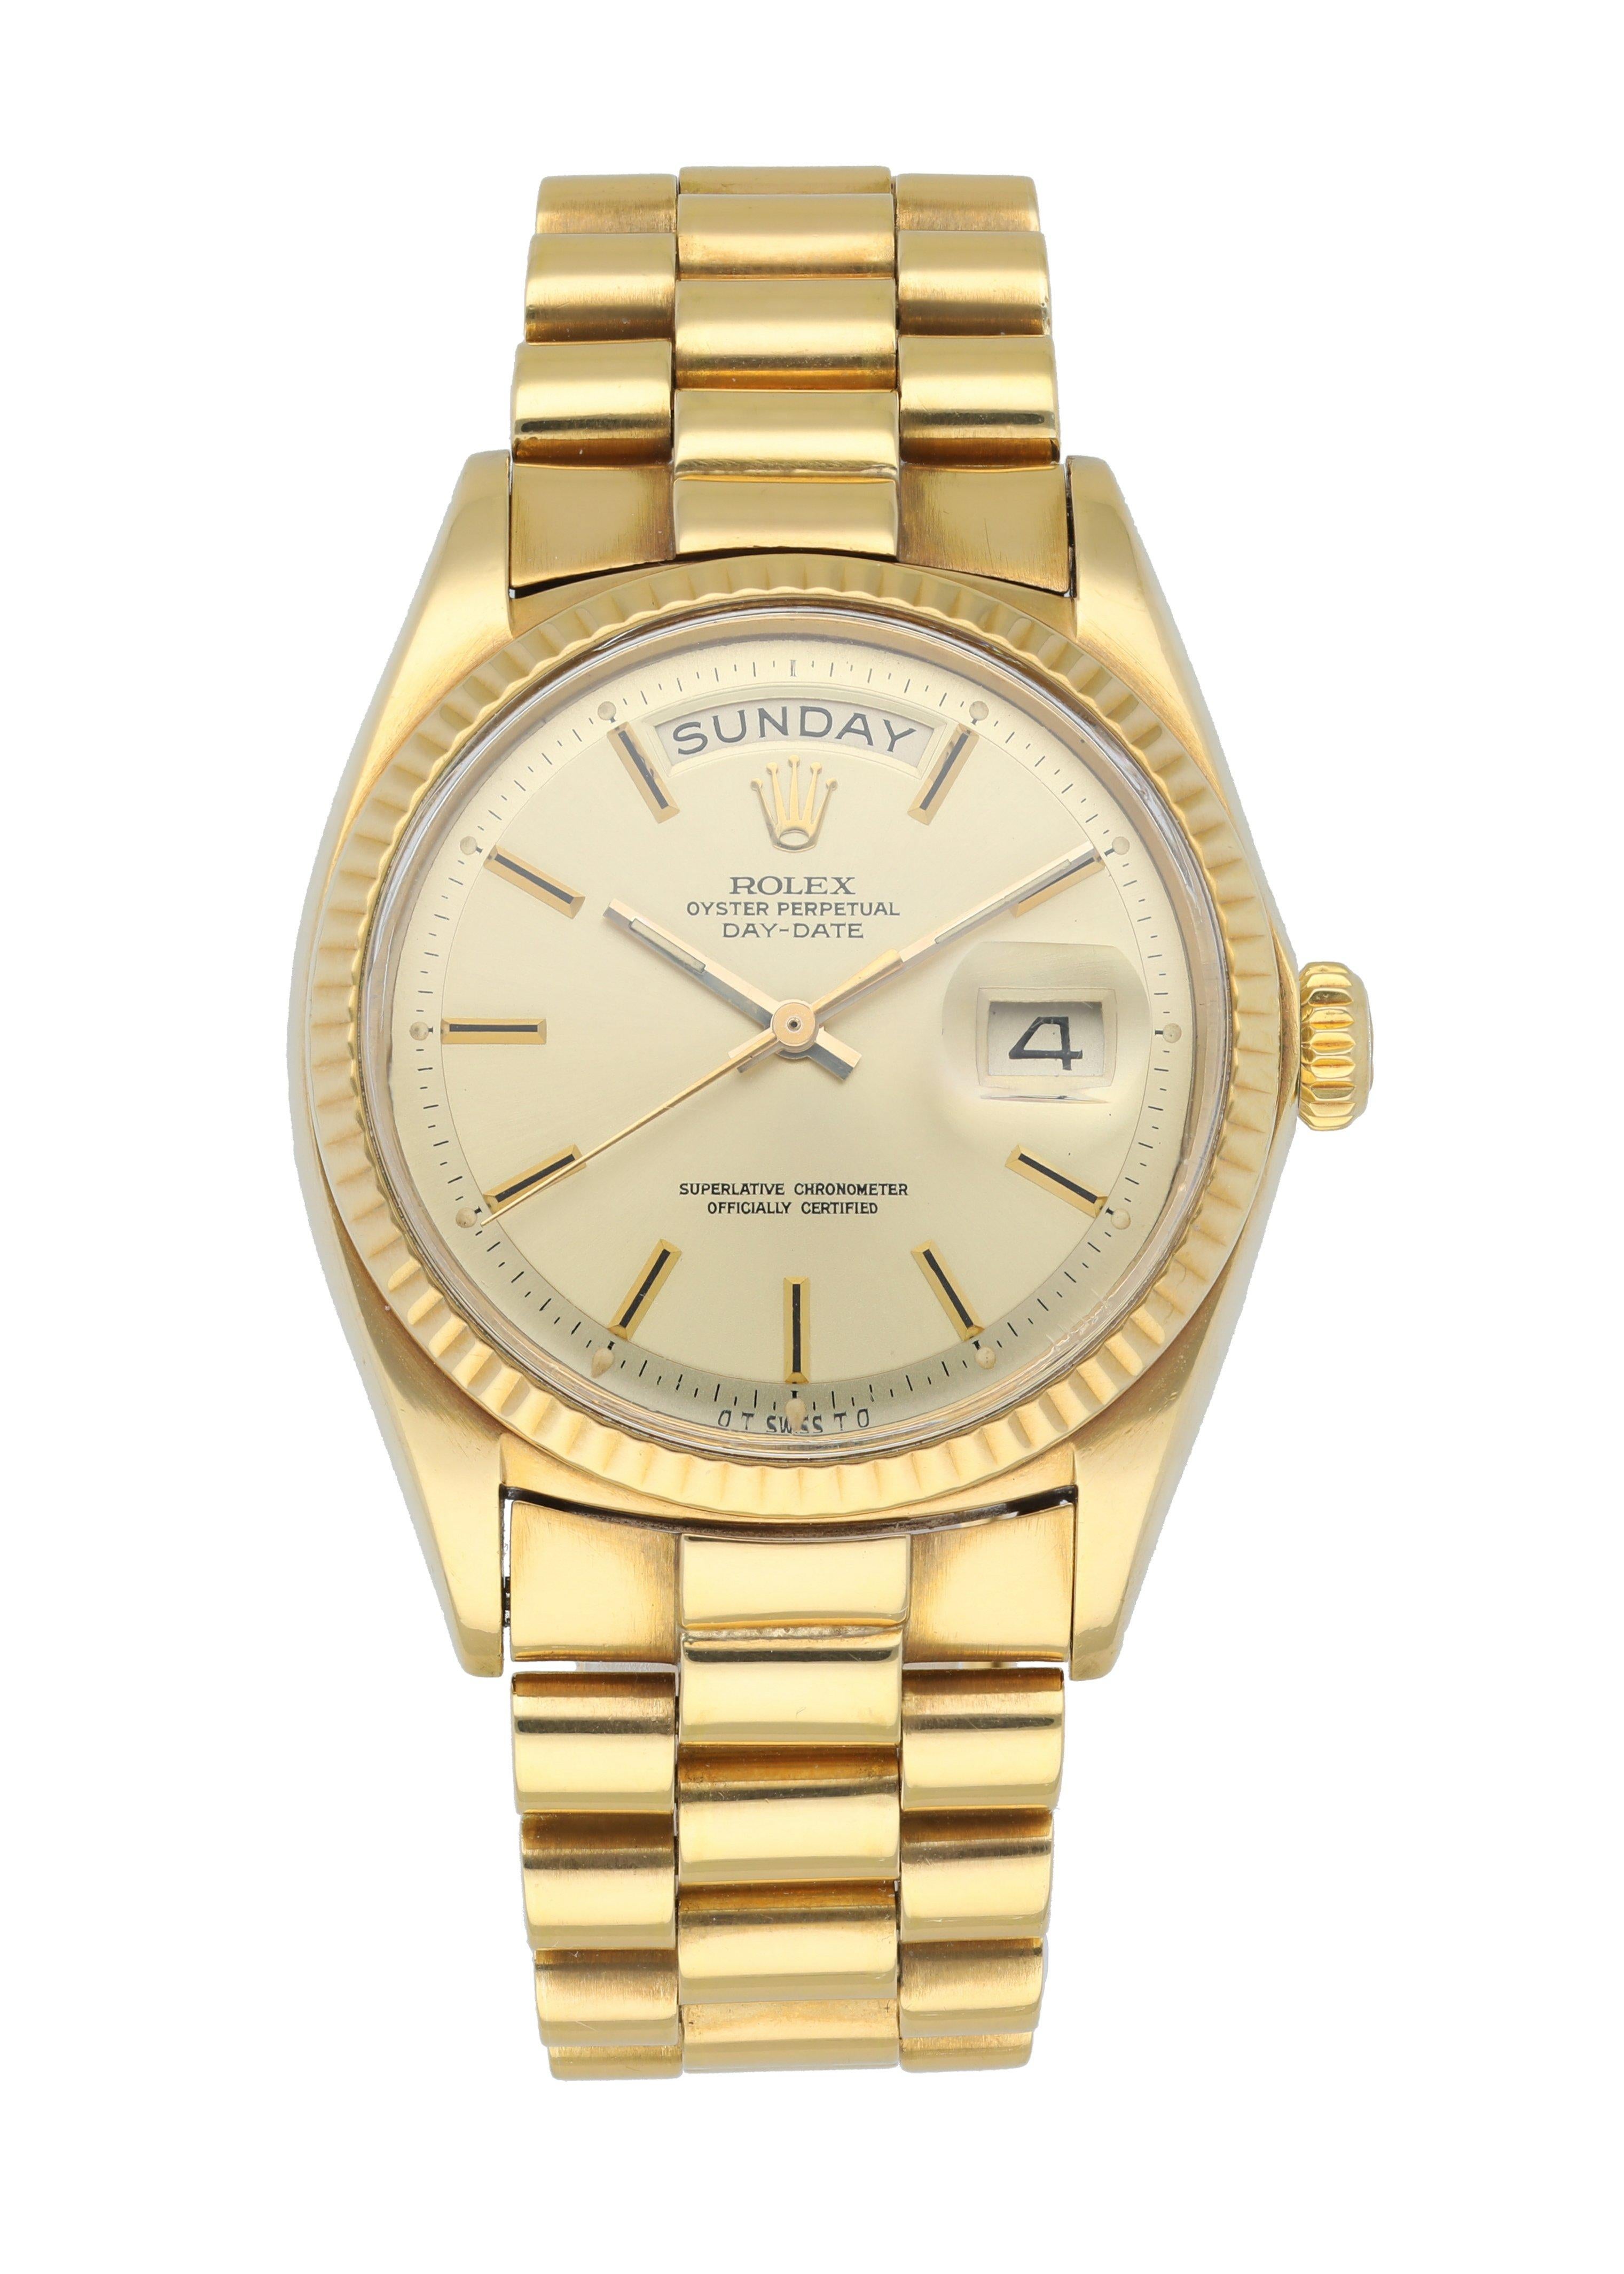 Rolex Day-Date President 1803 Men's Watch. 
36mm 18k Yellow gold case. 
Yellow Gold fluted bezel. 
Gold dial with gold hands and index hour markers. 
Minute markers on the outer dial. 
Date display at the 3 o'clock position. 
Yellow Gold Bracelet